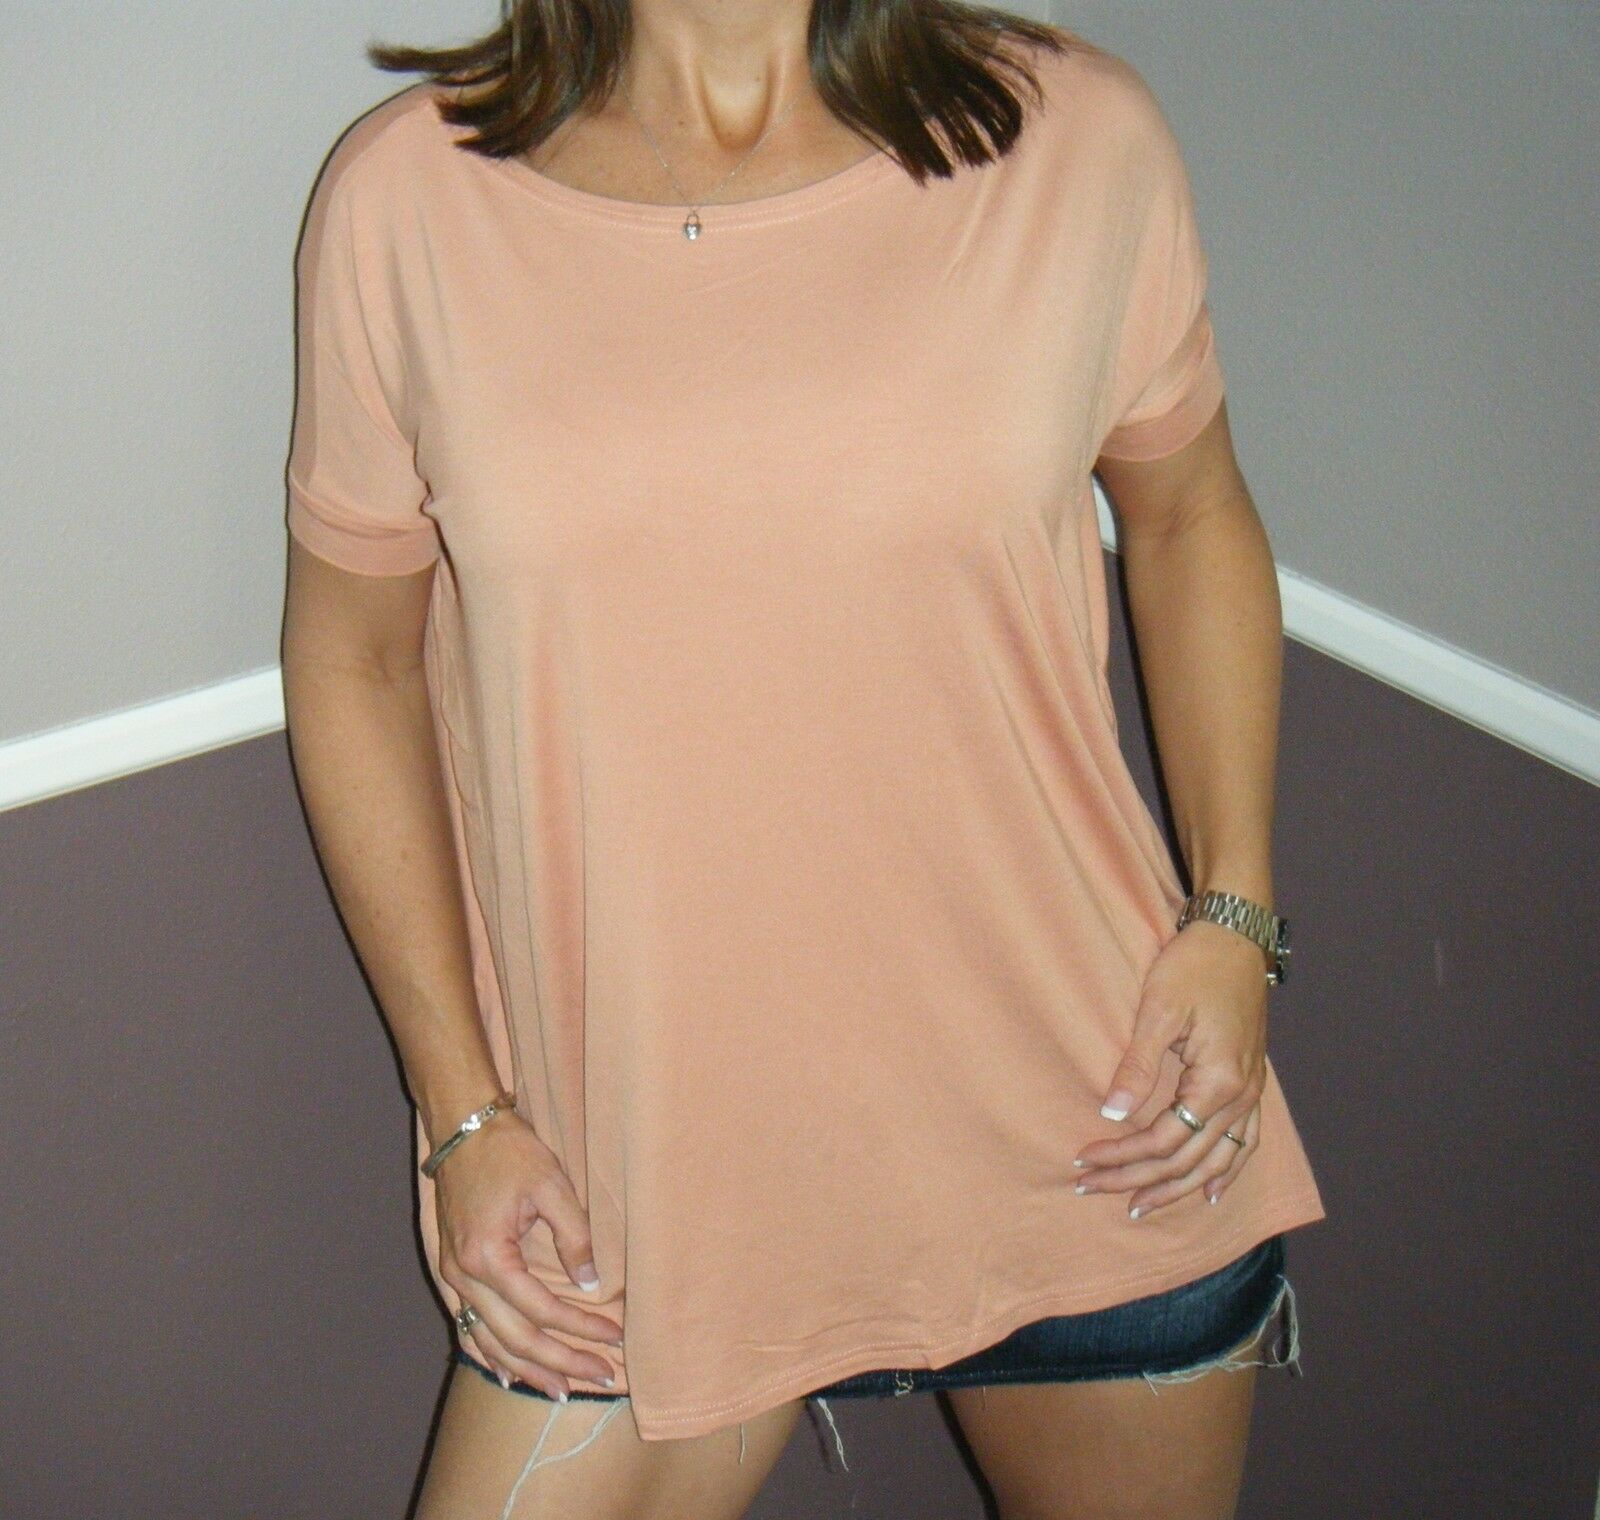 Sexy PIKO Dolman Wide Open Boat Neck Dolman Sleeve Tunic Top Shirt Nude S/M/L